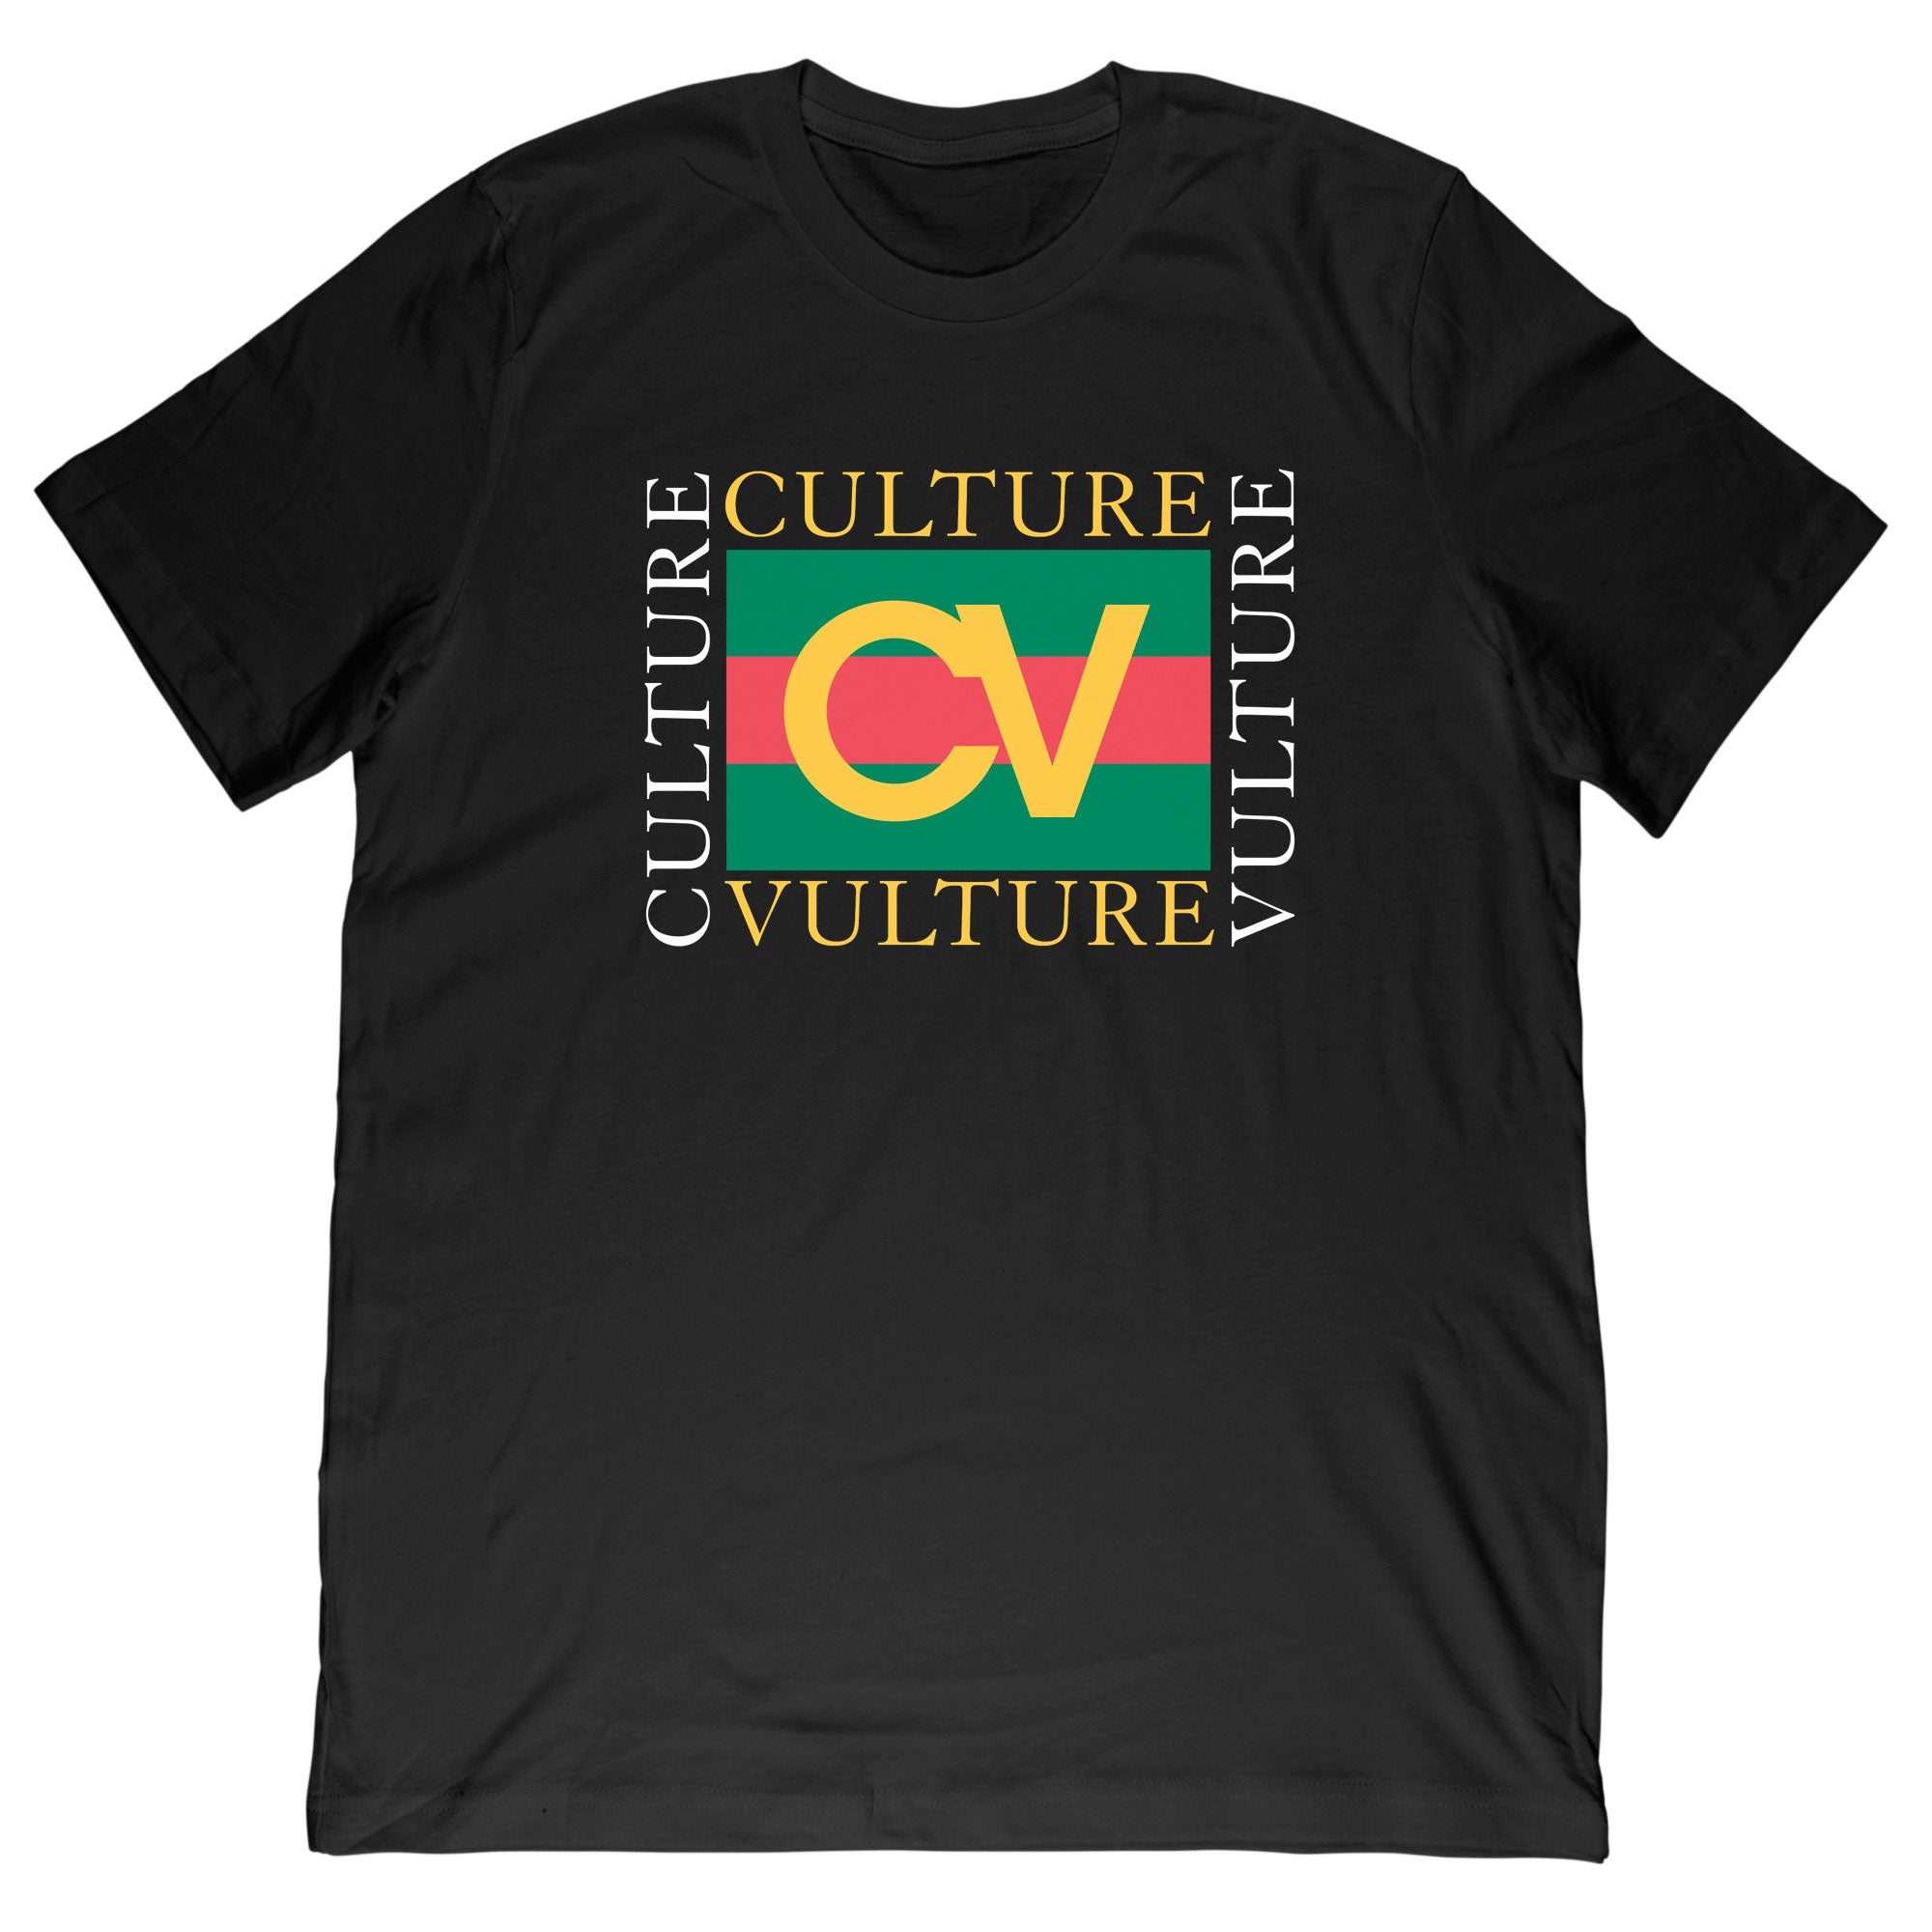 District5 - Culture Vulture Tee